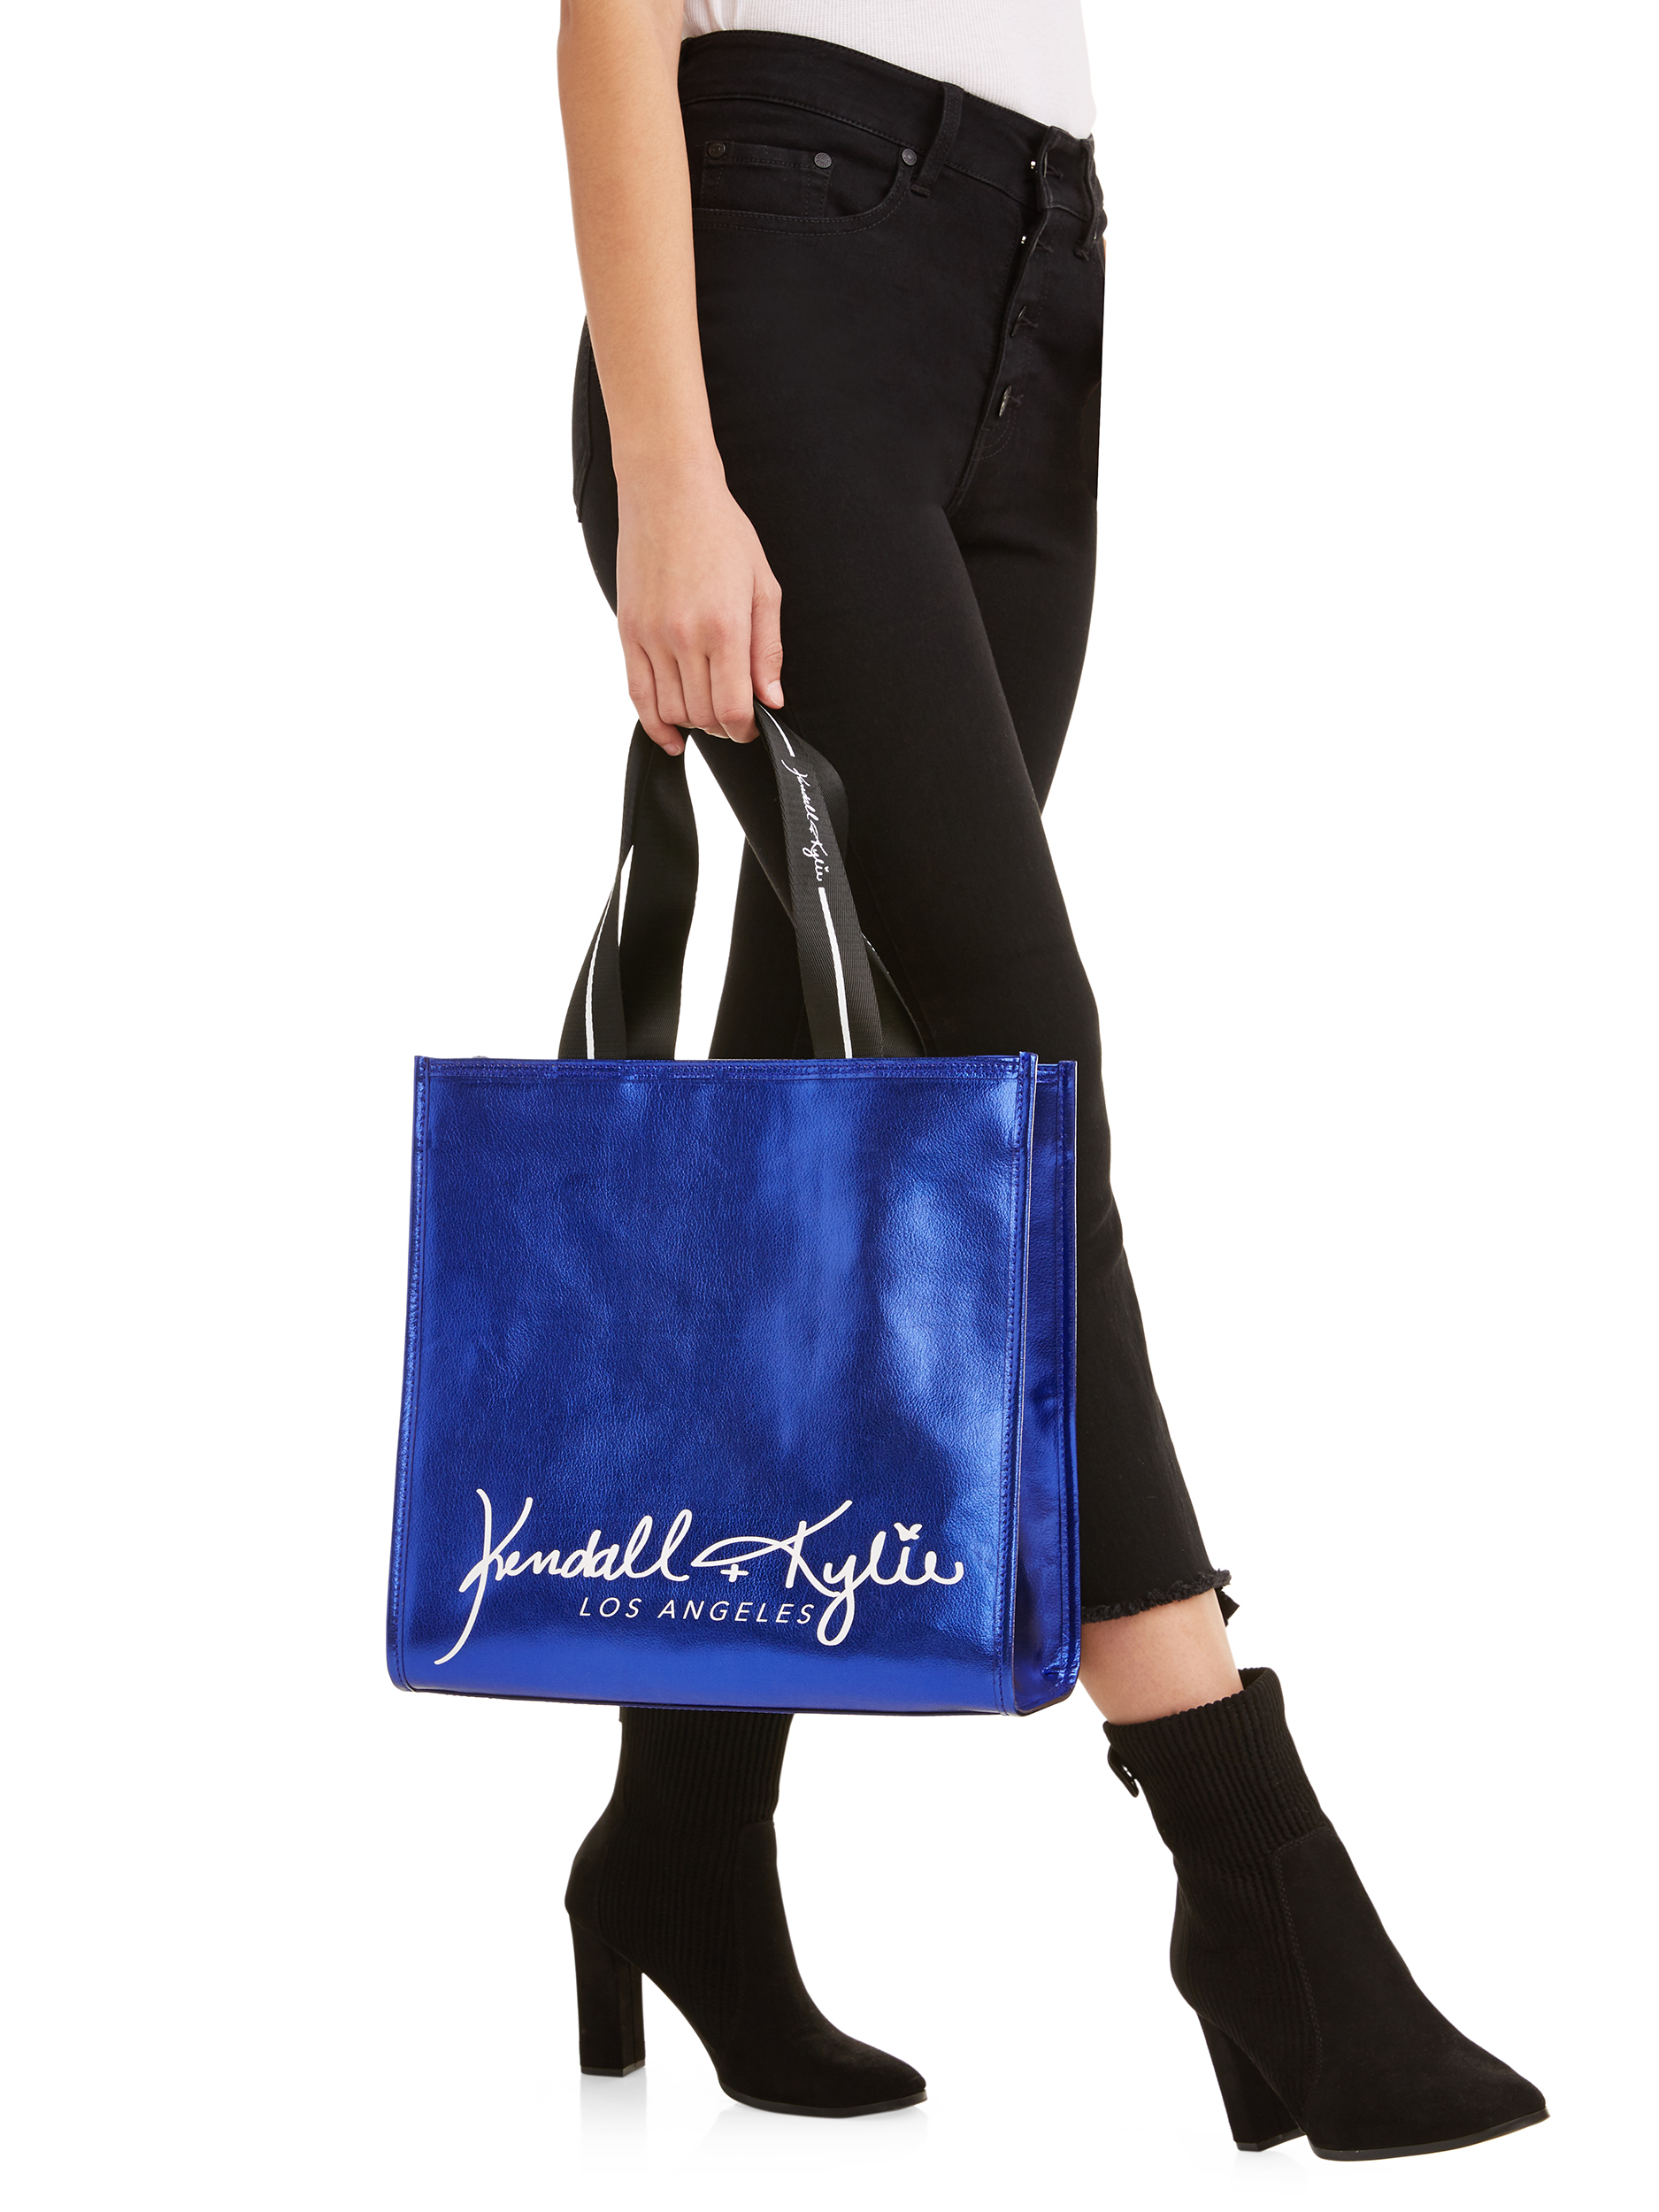 Kendall + Kylie for Walmart Cobalt Tote - image 4 of 5